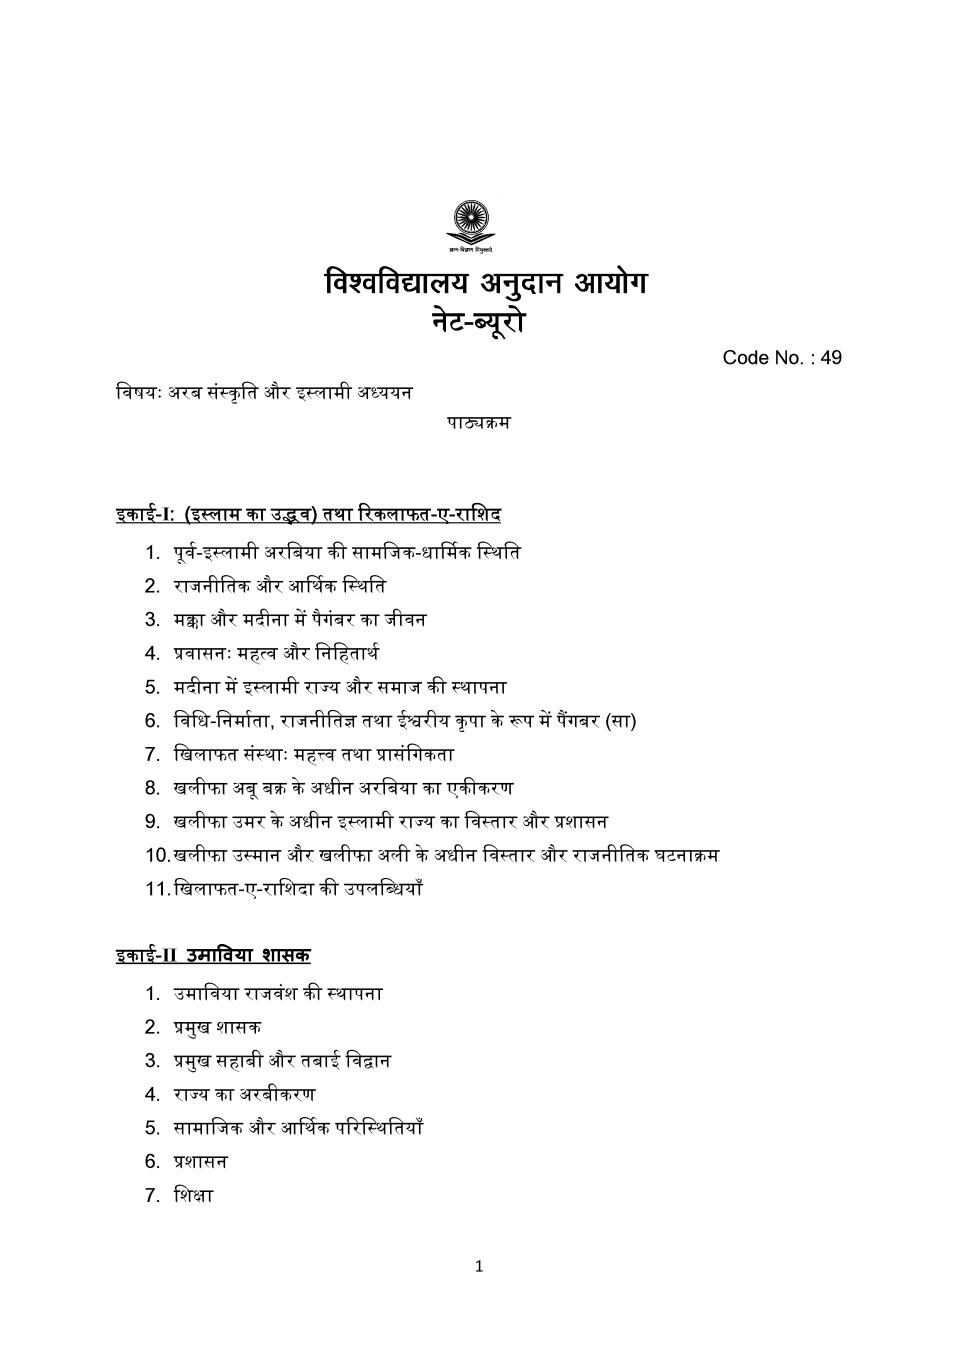 UGC NET Syllabus for Arab Culture and Islamic Studies 2020 in Hindi - Page 1